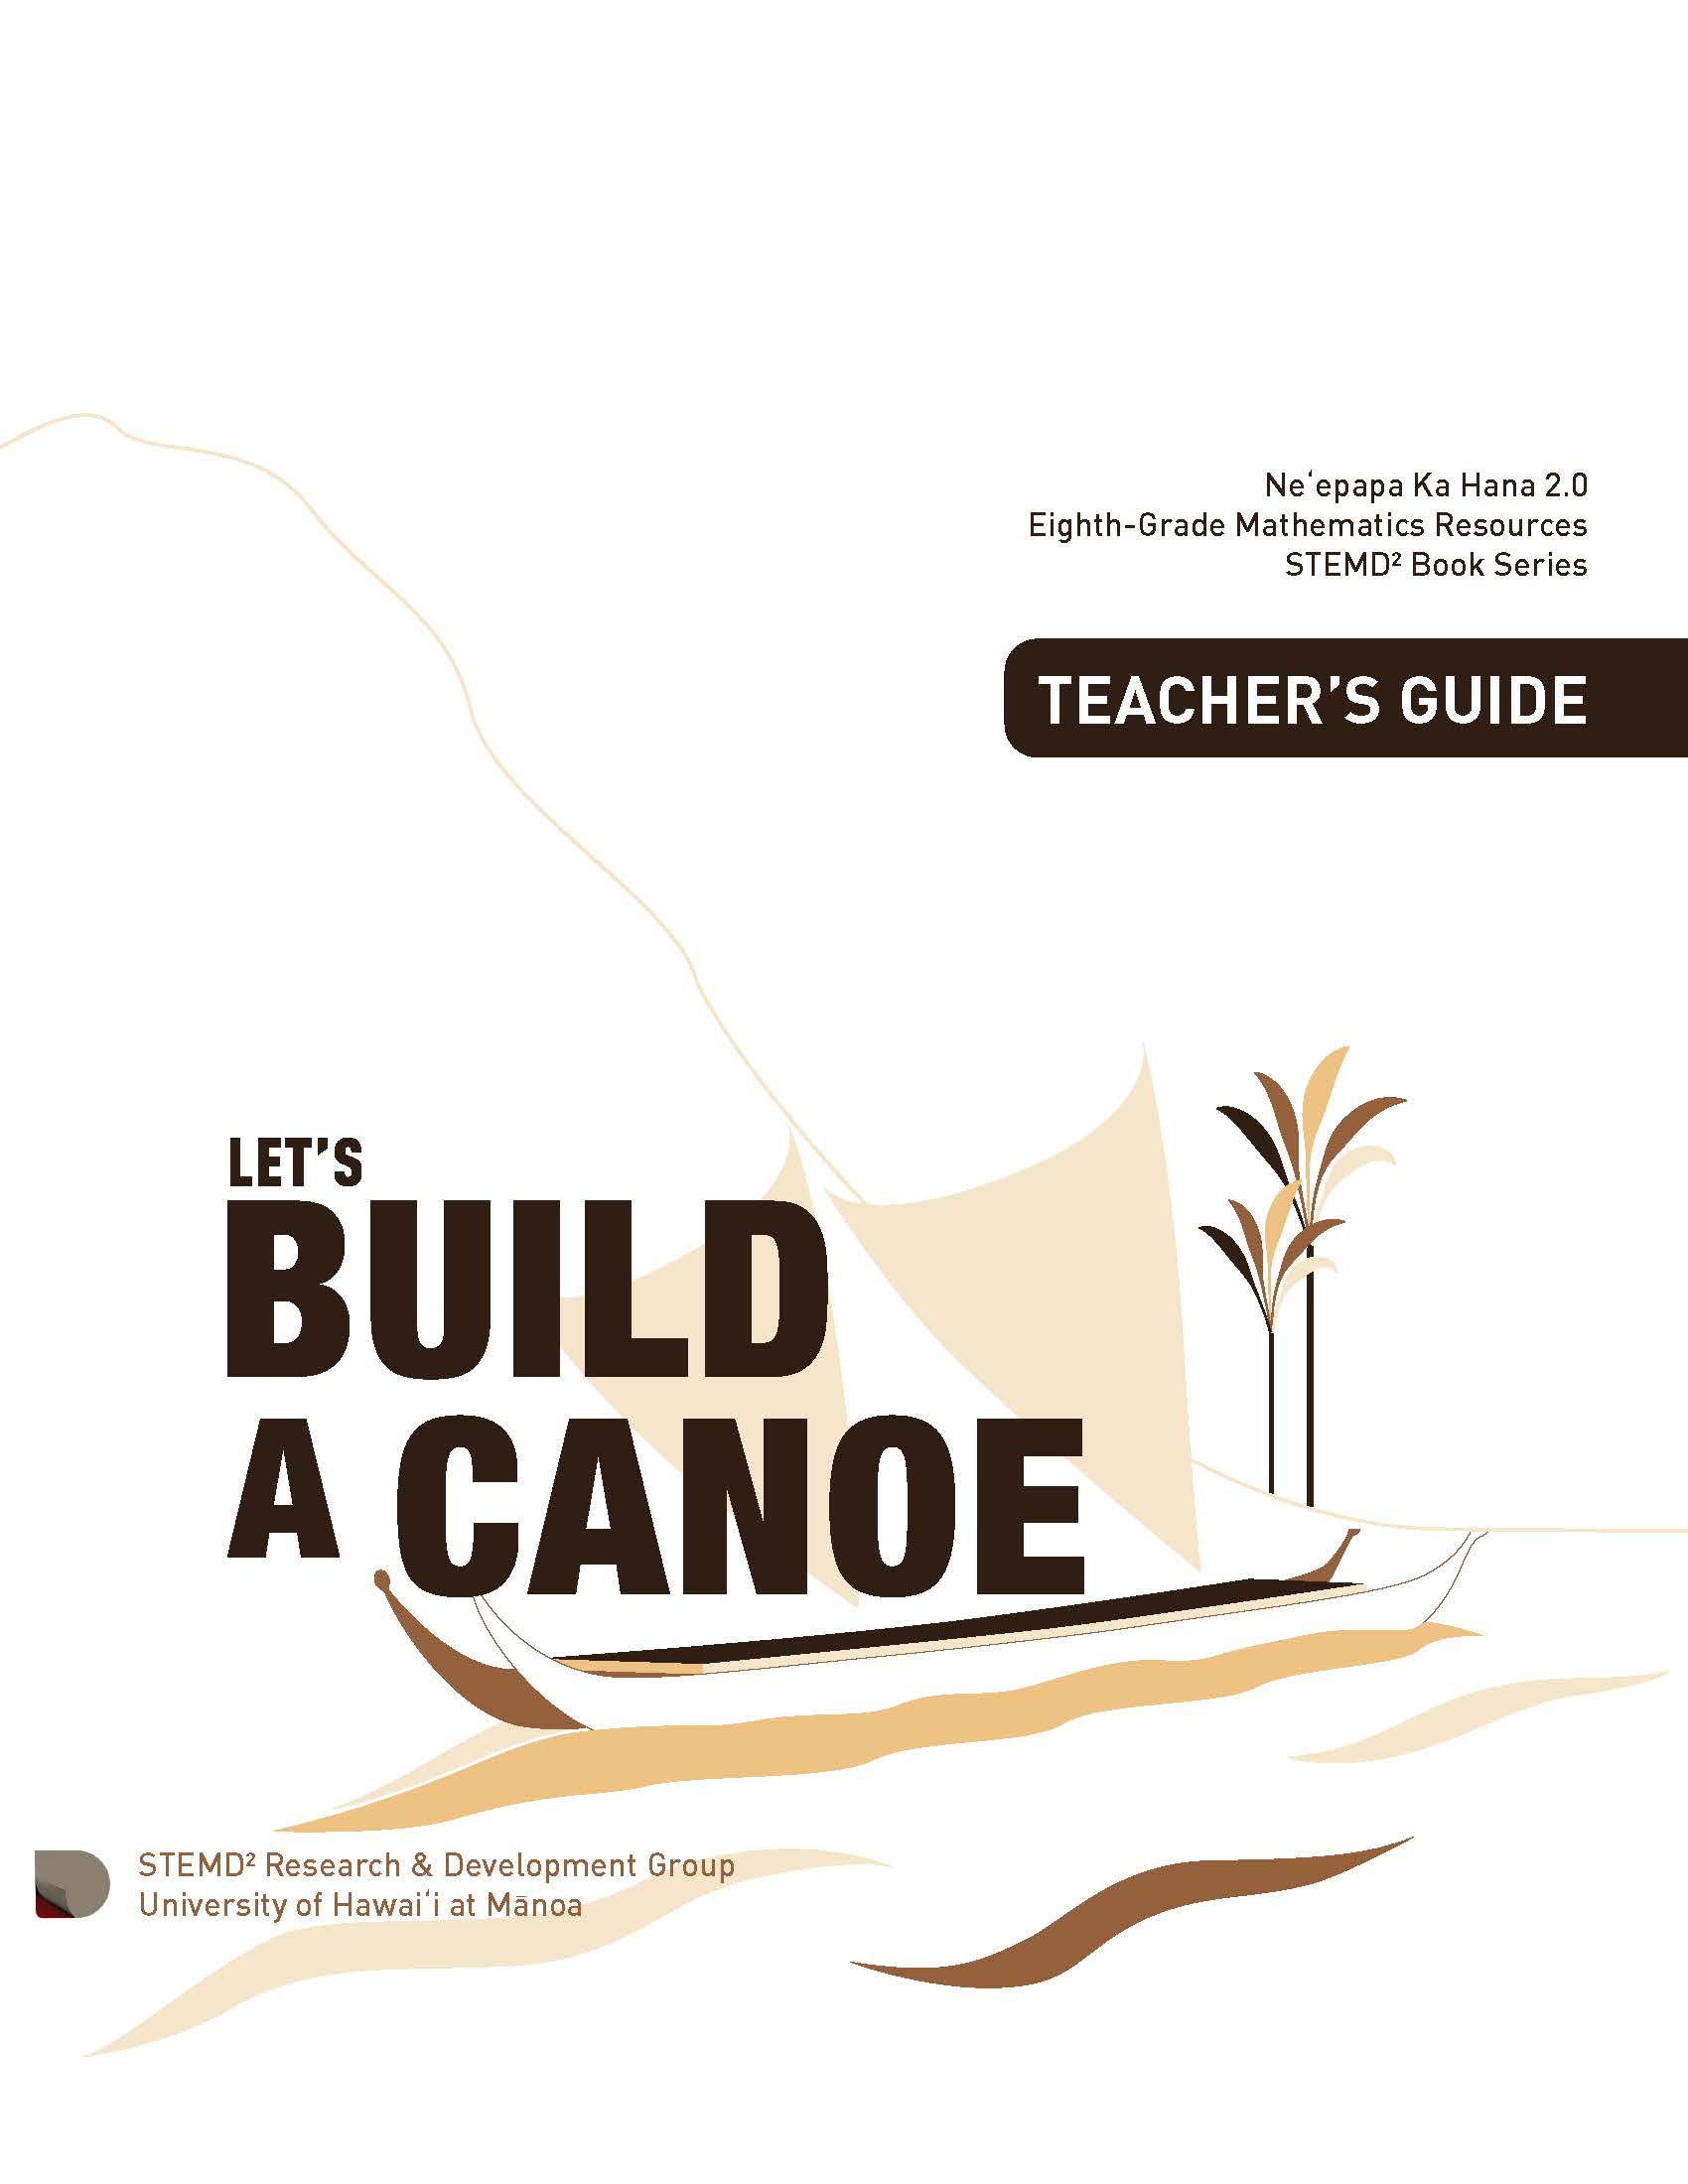 Let's take care of the lo'i 7th teacher book